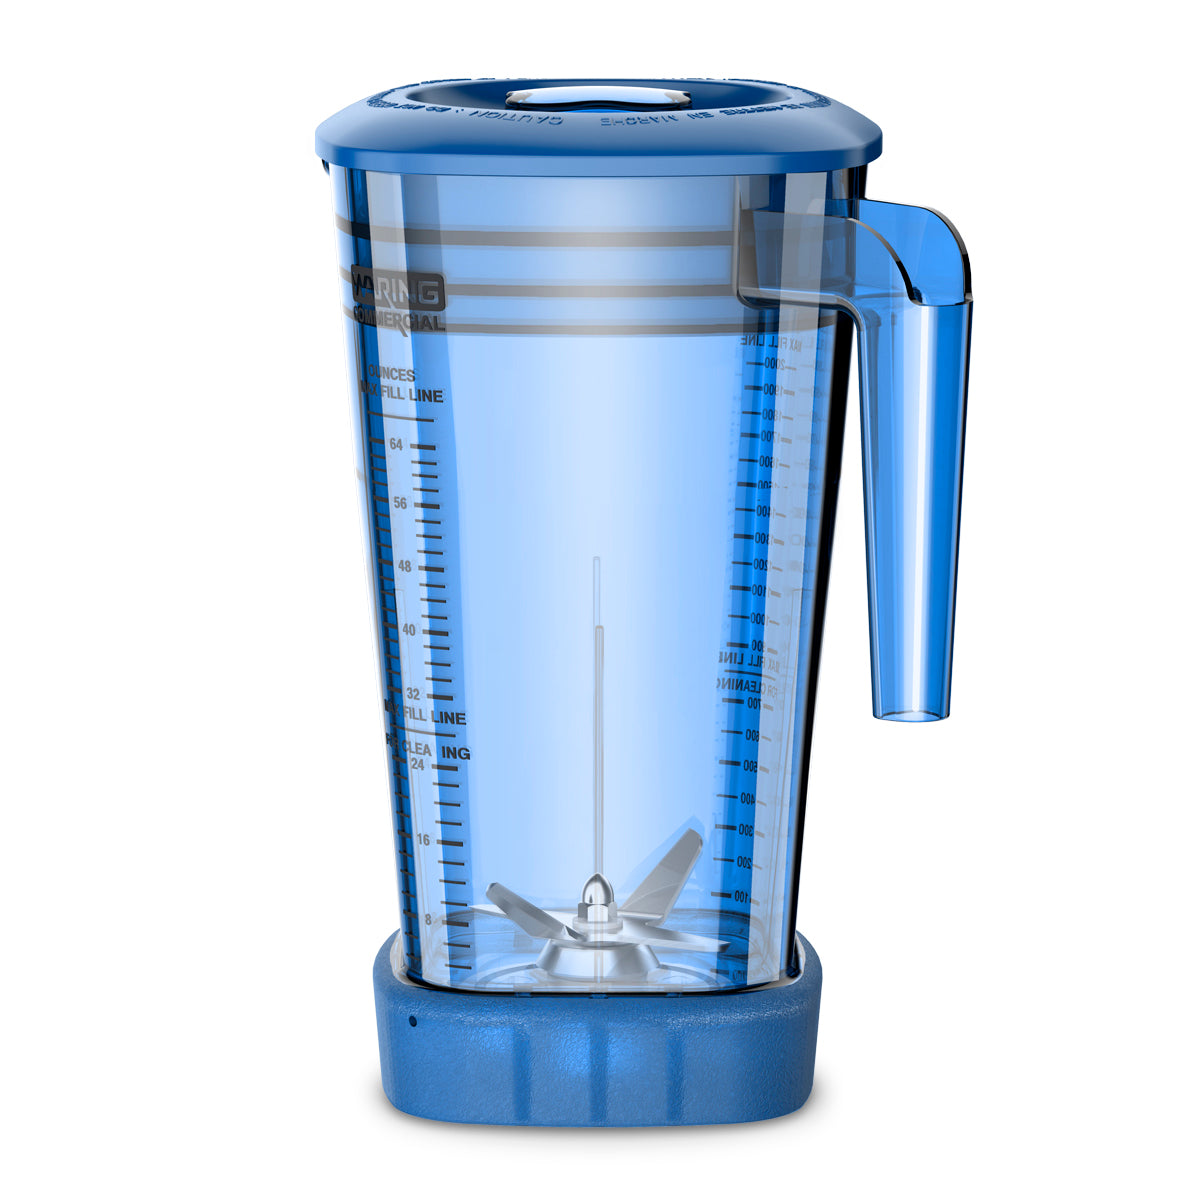 CAC95-06 - "The Raptor" 64-oz. BPA-Free Blue Copolyester Container Complete with Blade and Lid — MX Series